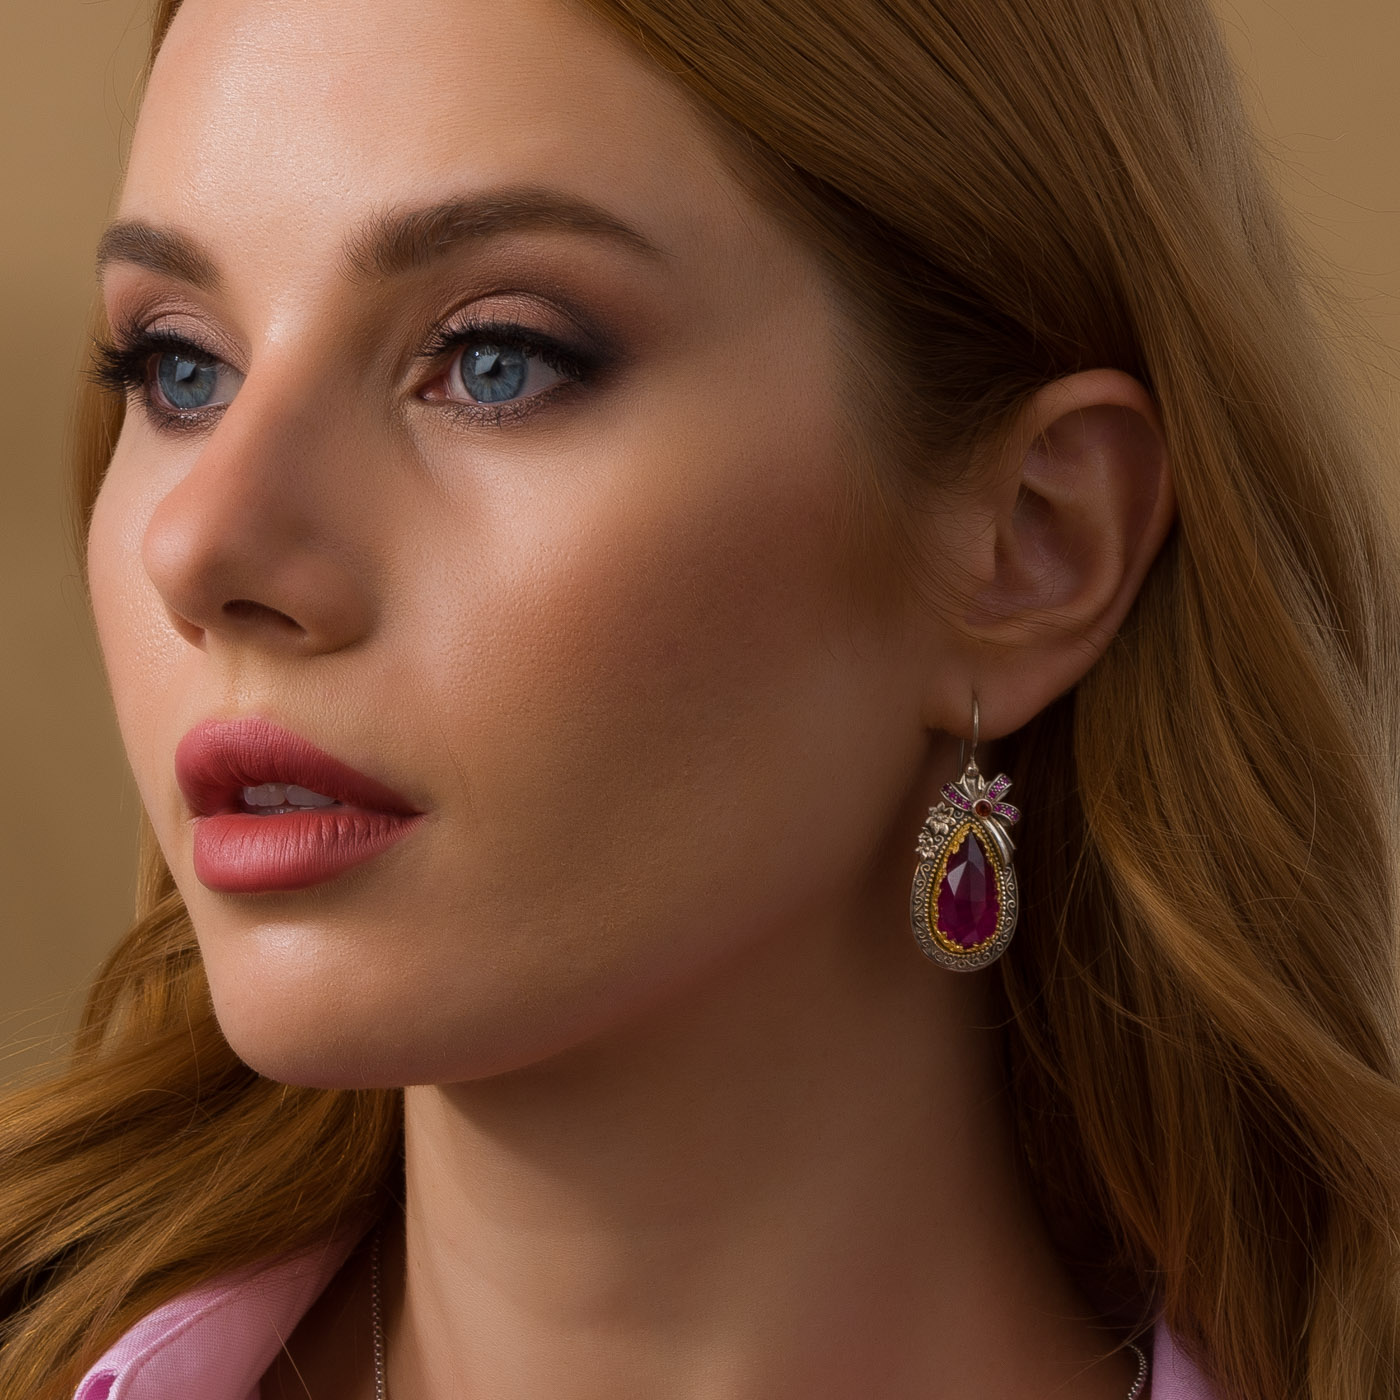 Dione earrings in sterling silver with Gold plated parts